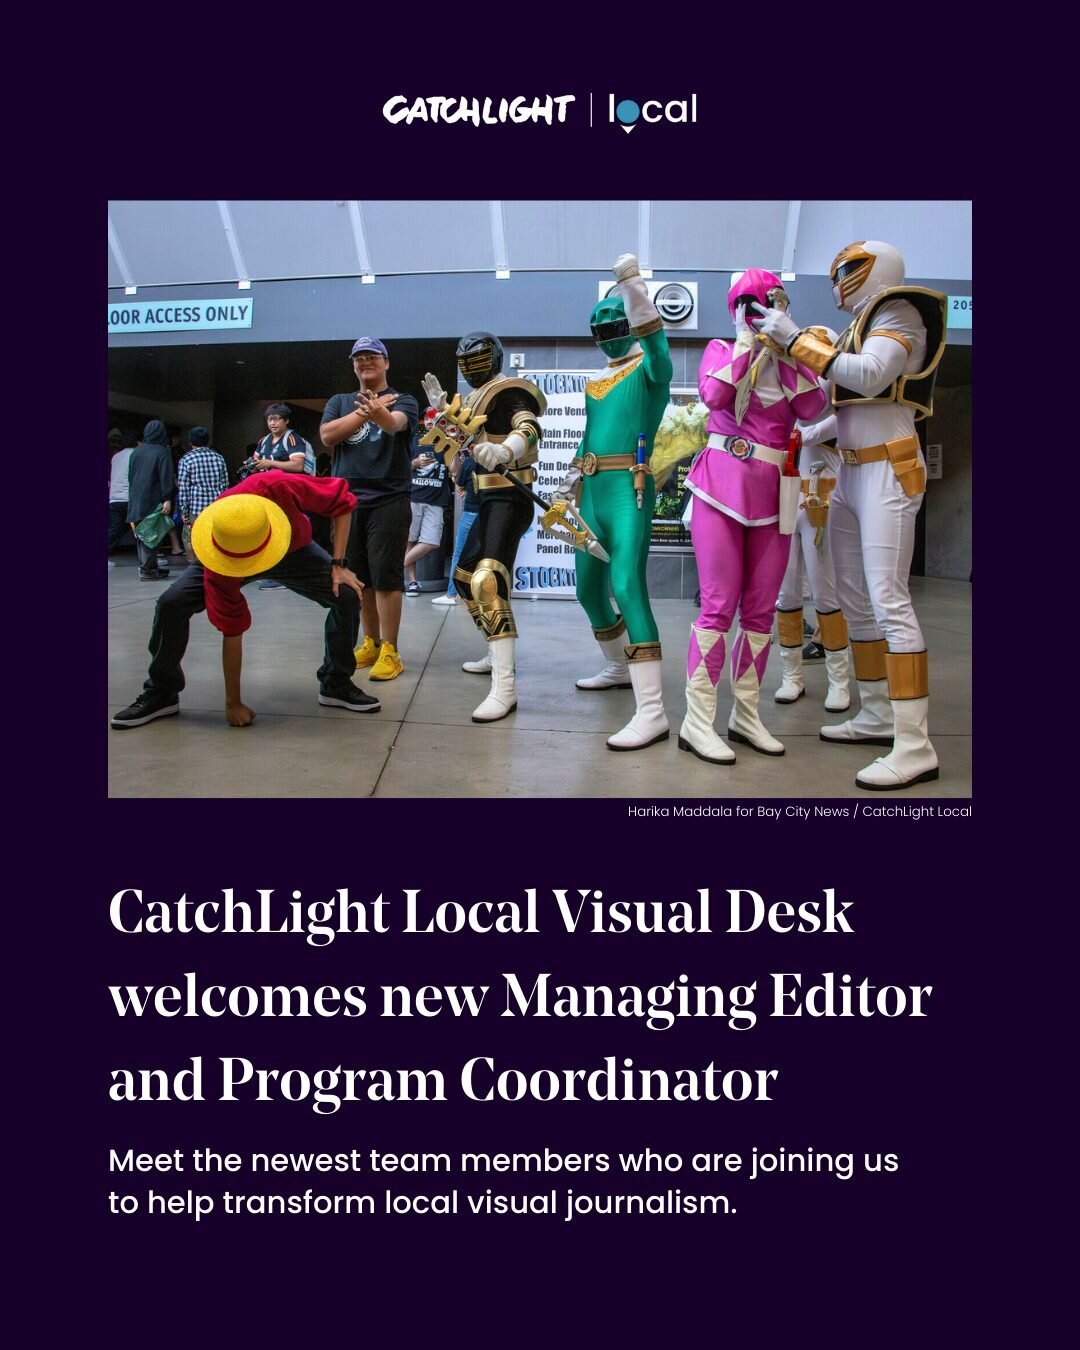 We have big plans to grow the CatchLight Local Visual Desk this year, and we are excited to take on the challenge with a growing team. To our new Managing Editor, @cdukehart, and Program &amp; Evaluation Coordinator, @simonaapetrica &mdash; welcome t